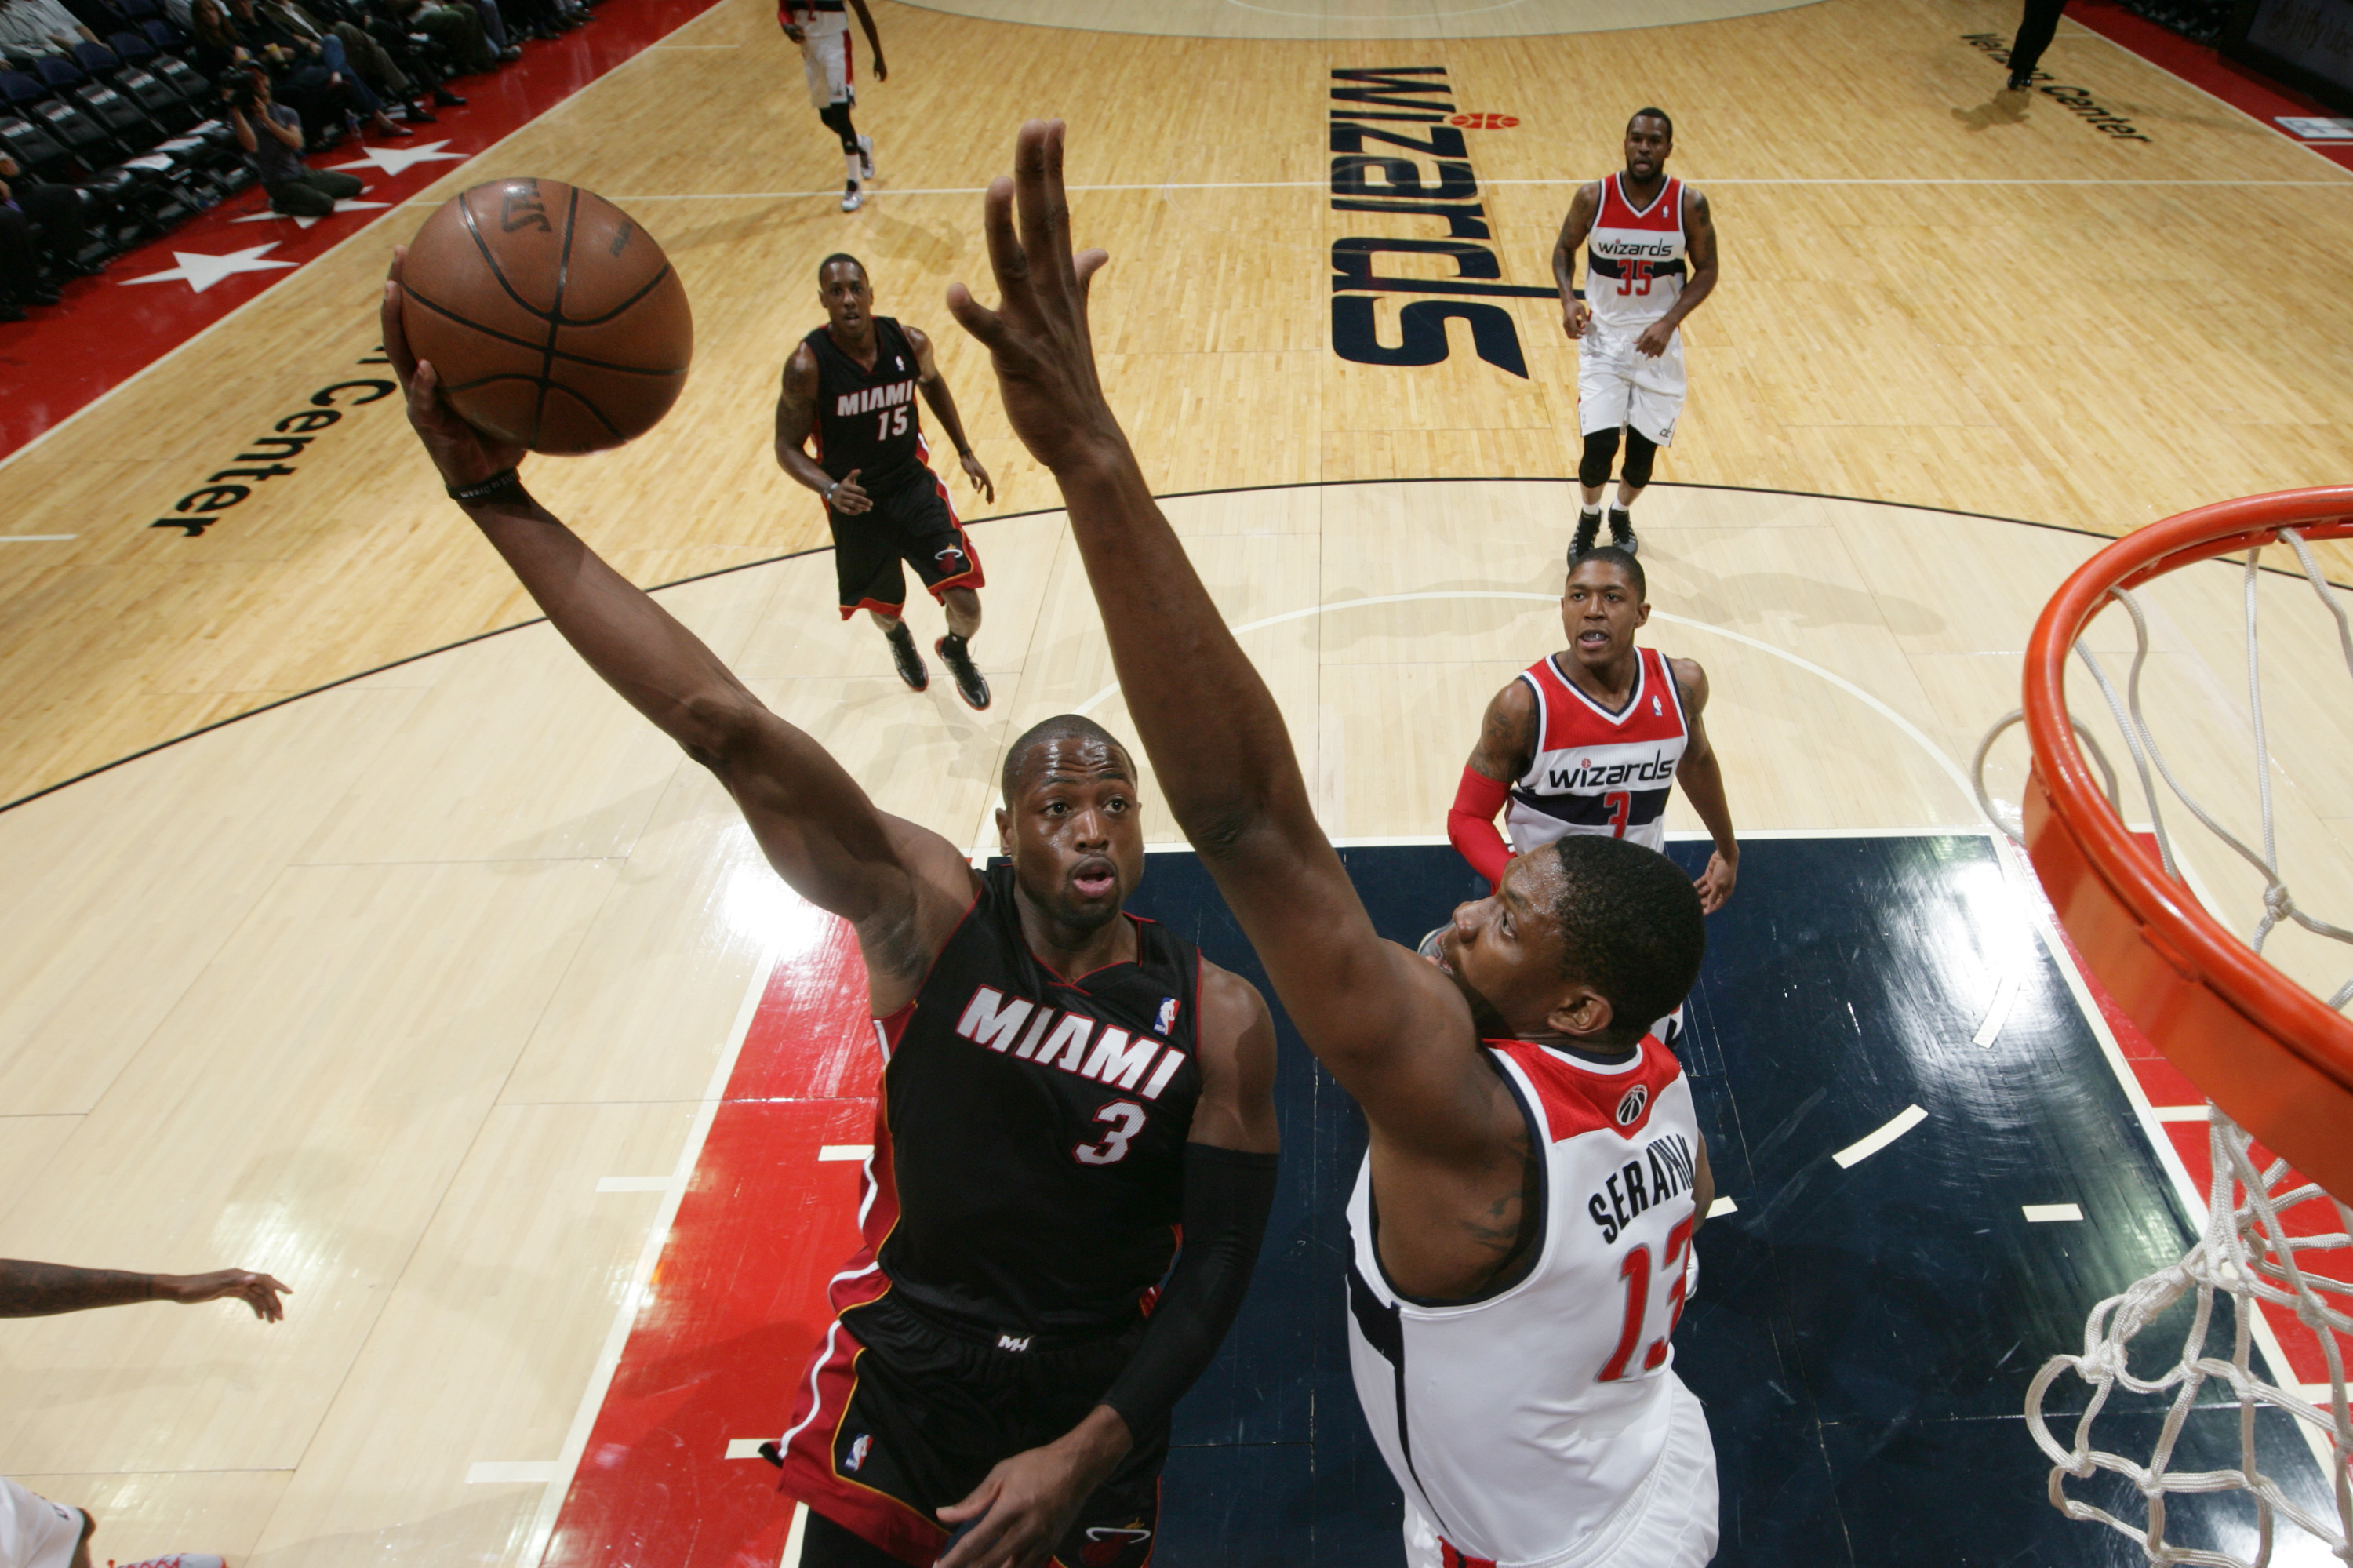 NO FILM, NO VIDEO, NO TV, NO DOCUMENTARY - Miami Heat's Dwyane Wade drives  to the basket during the first quarter at AmericanAirlines Arena in Miami,  FL, USA on March 2, 2015.